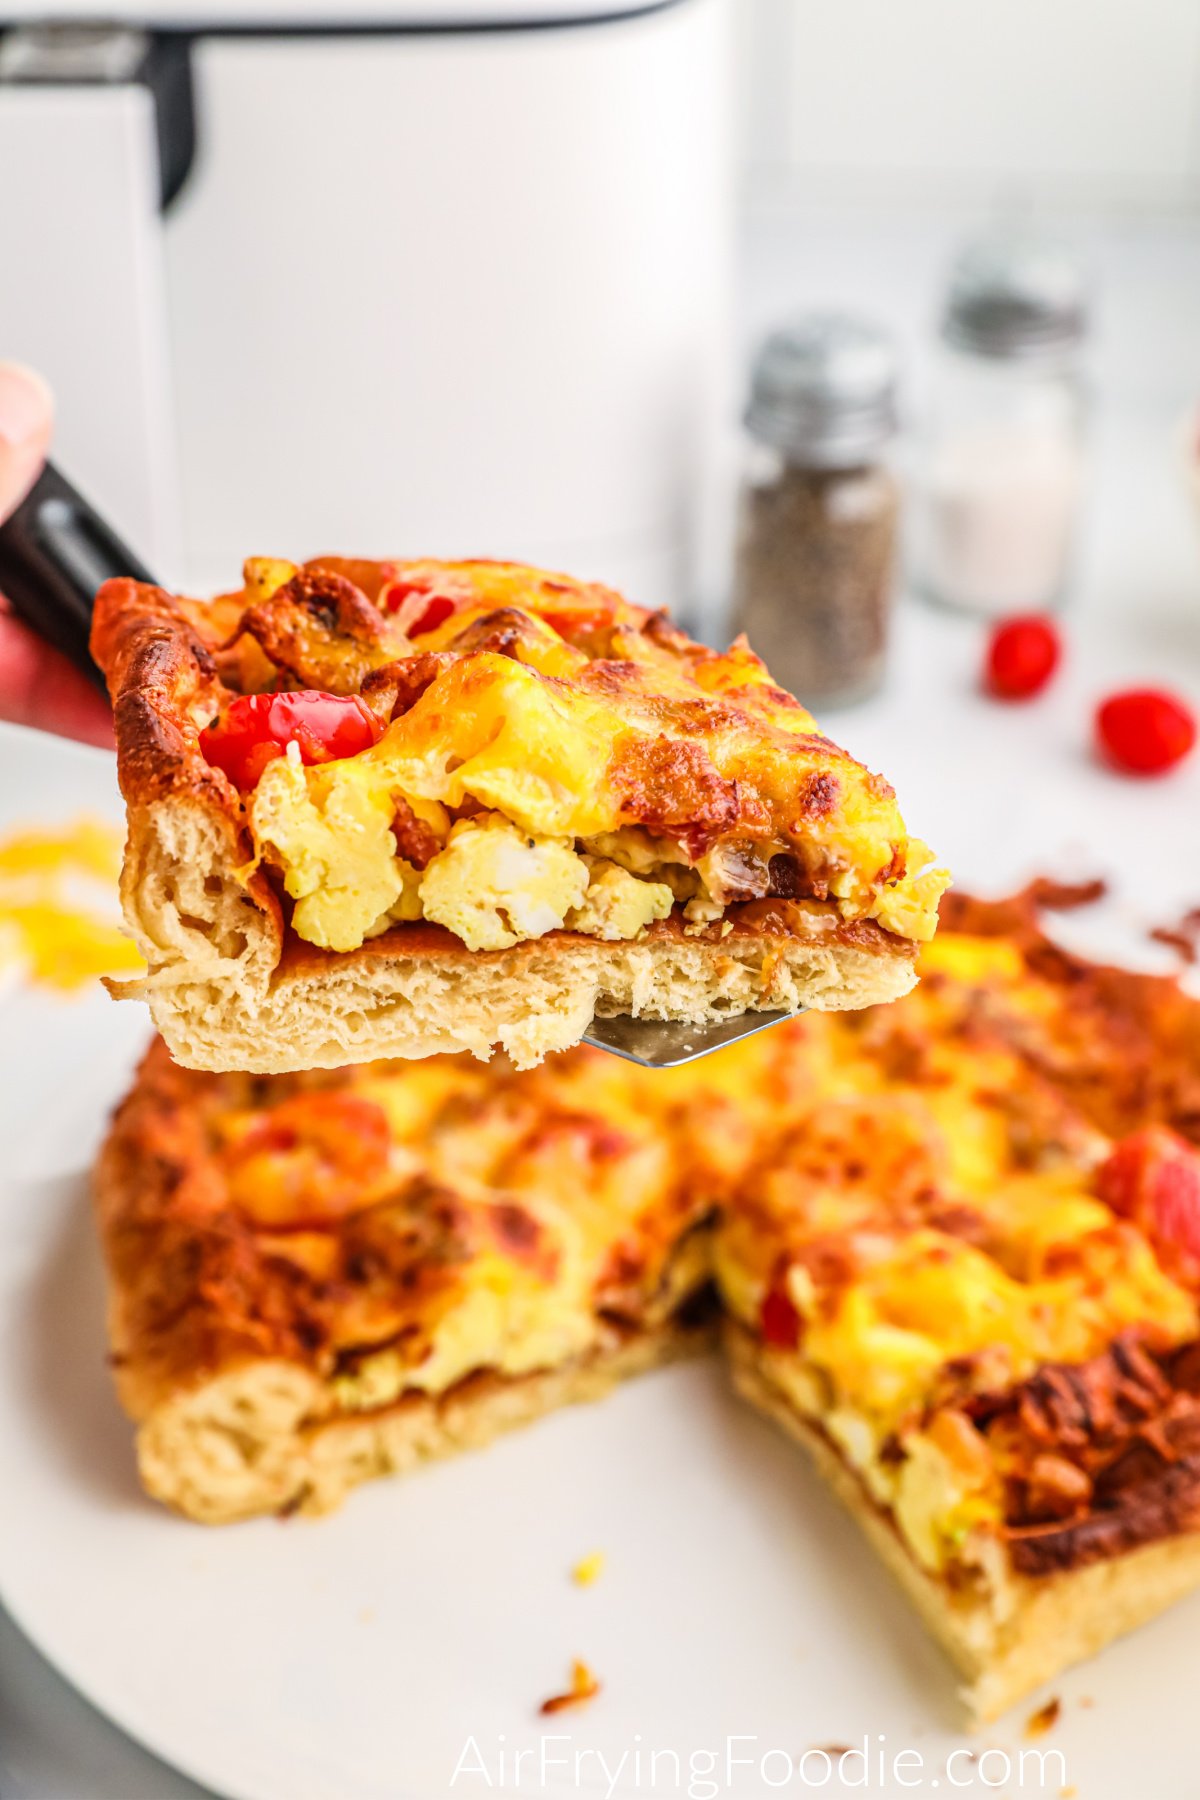 Slice of breakfast pizza made in the air fryer on a spatula.